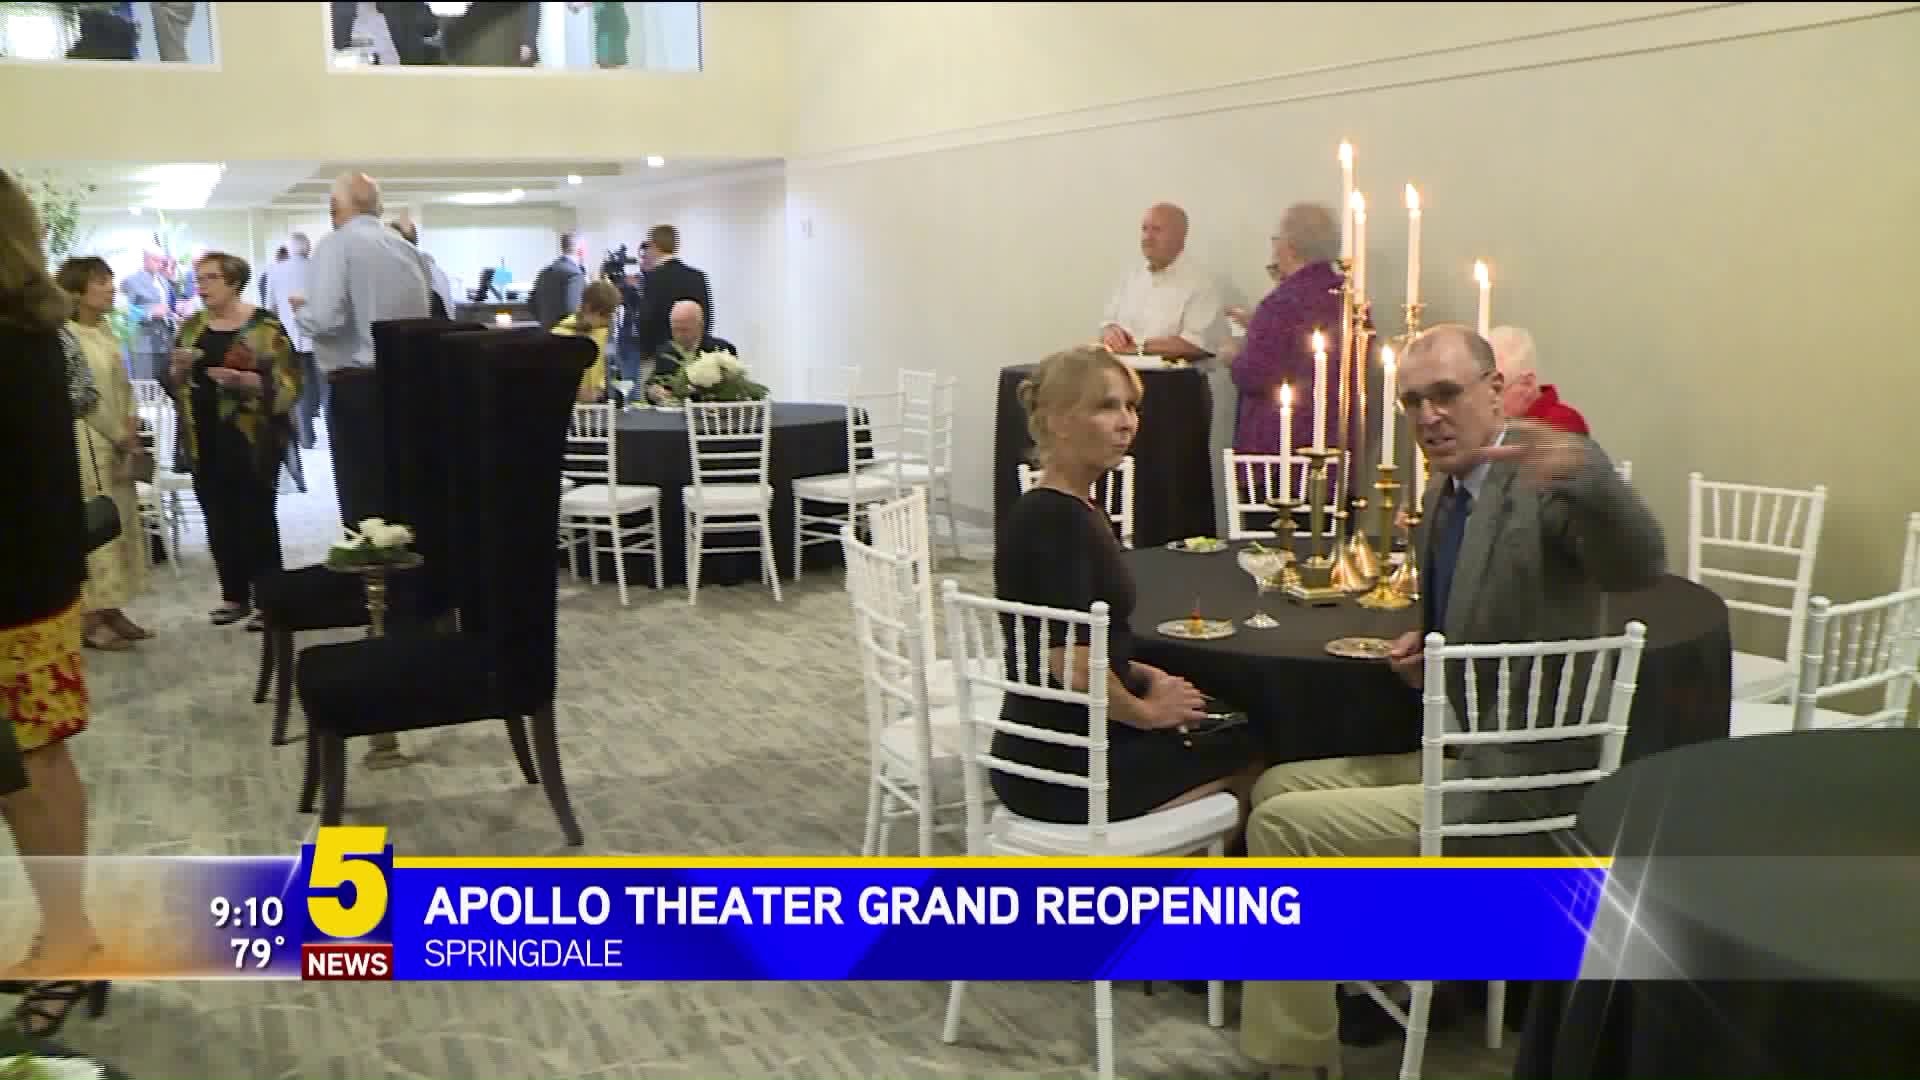 Apollo Theater Grand Reopening